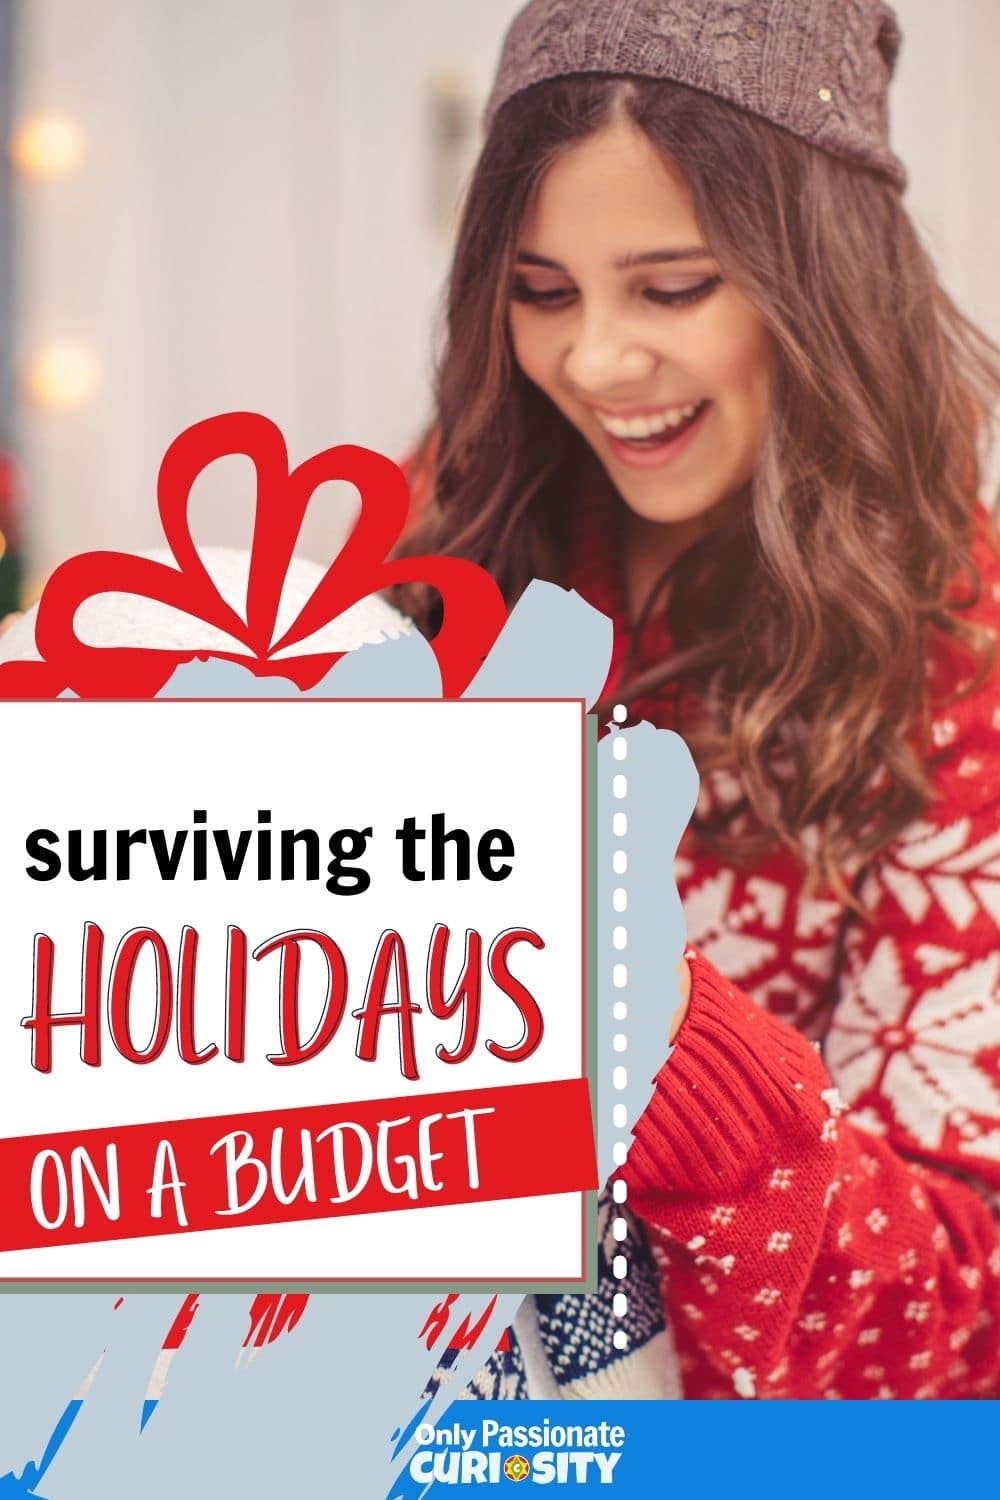 It's almost the holiday season! Are you ready for it? Or are you feeling a little bit anxious about your holiday budget and how much you are about to spend this Christmas? Here are some tips on surviving holidays on a budget.